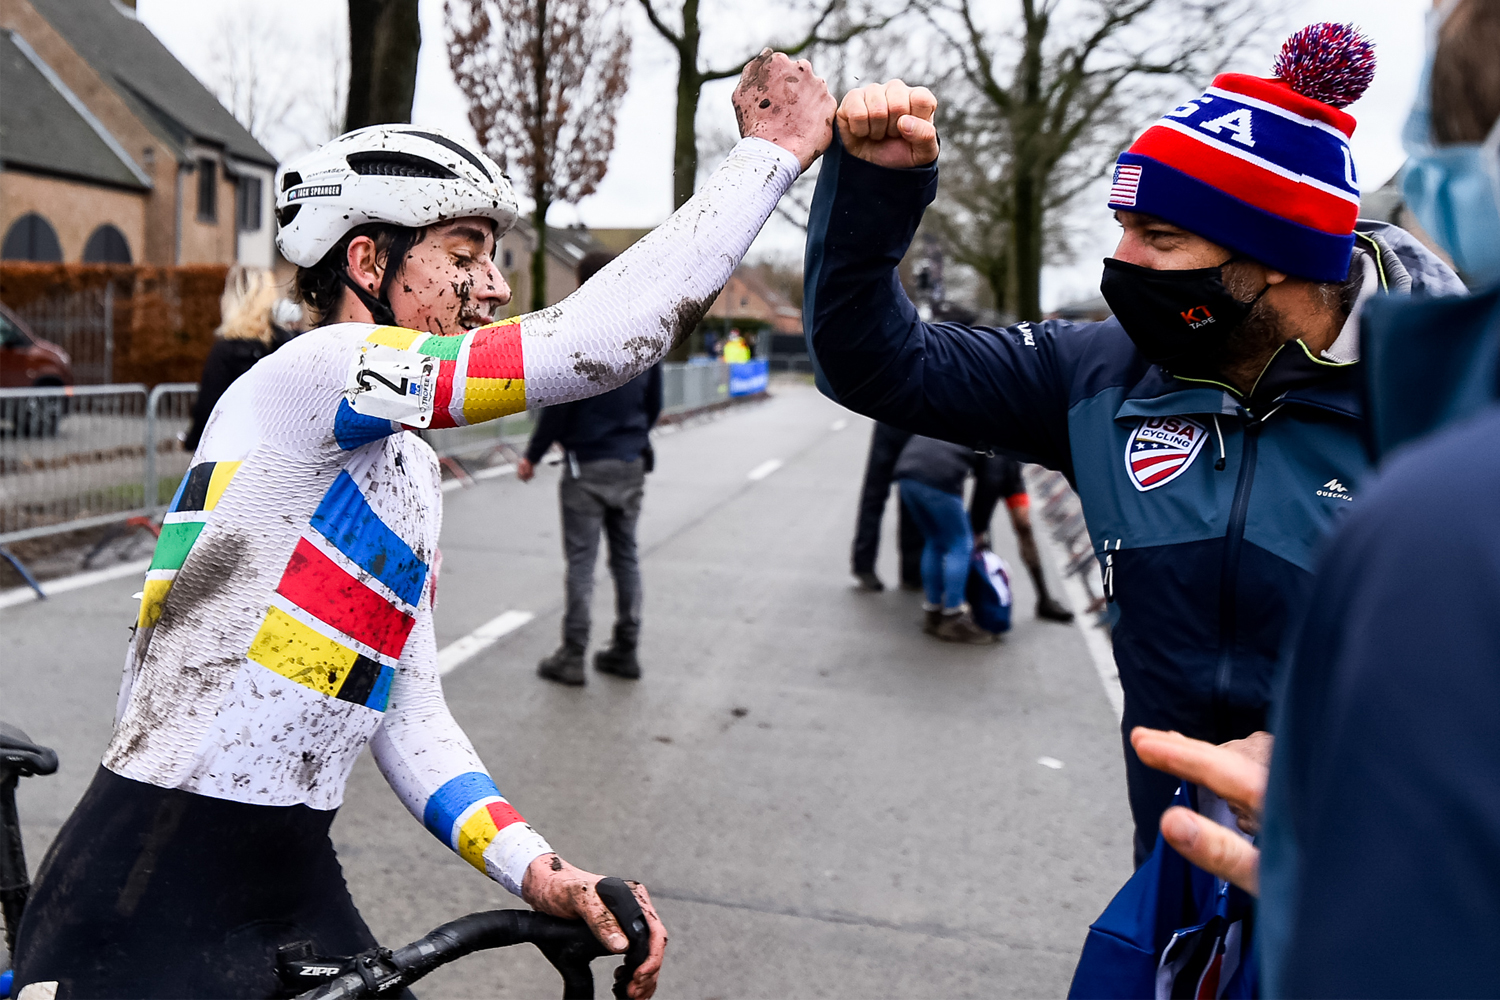 USA Cycling coach celebrates with cyclocross athlete